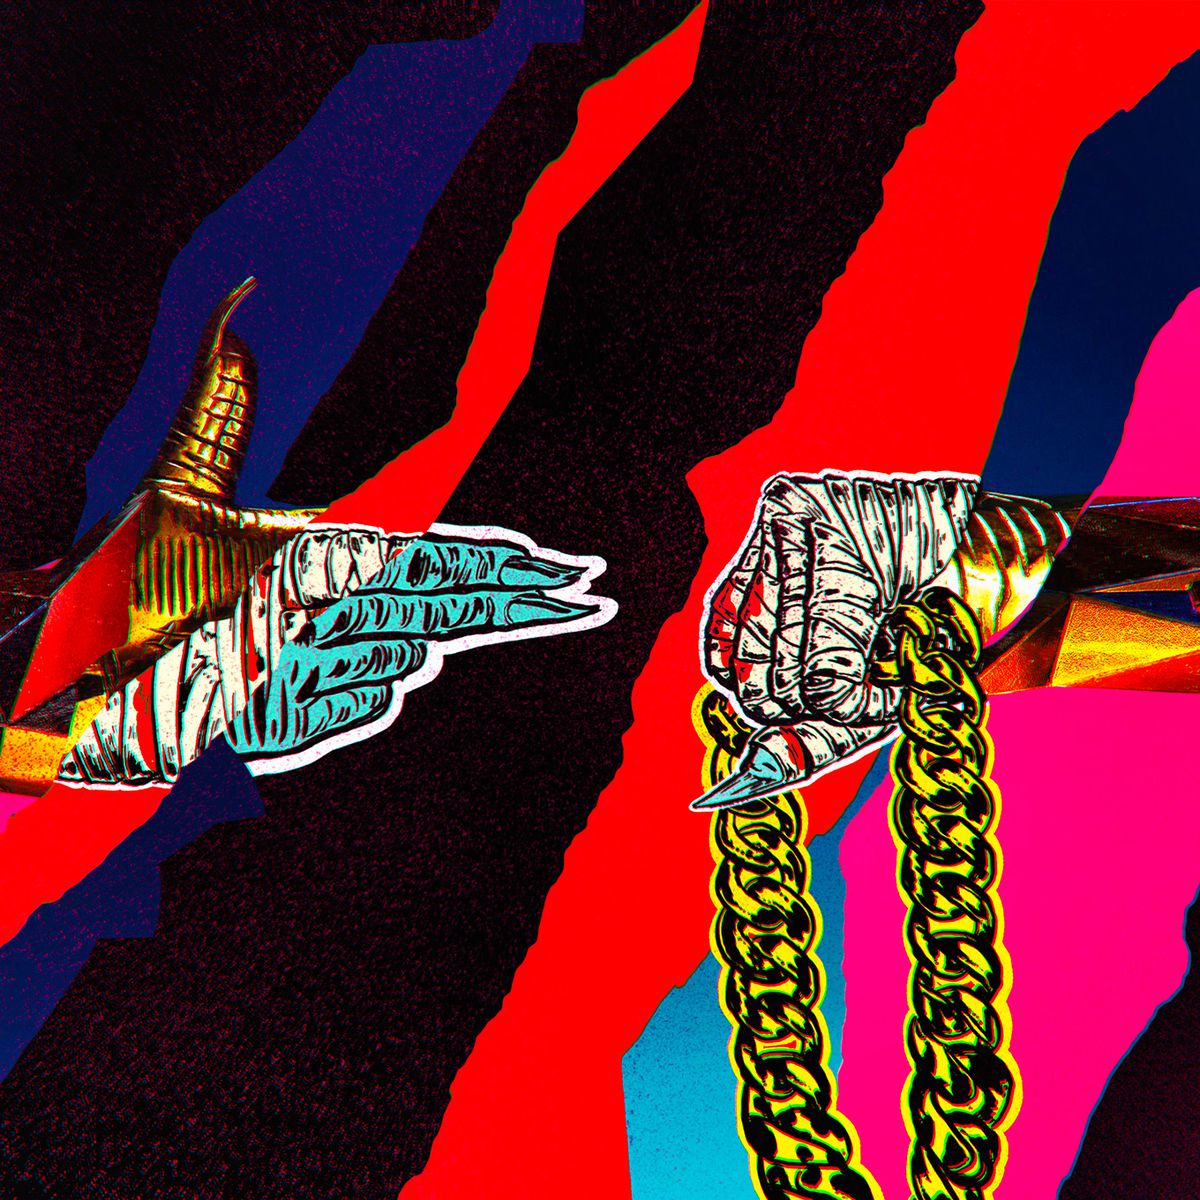 The visual storytelling of Run The Jewels The Verge